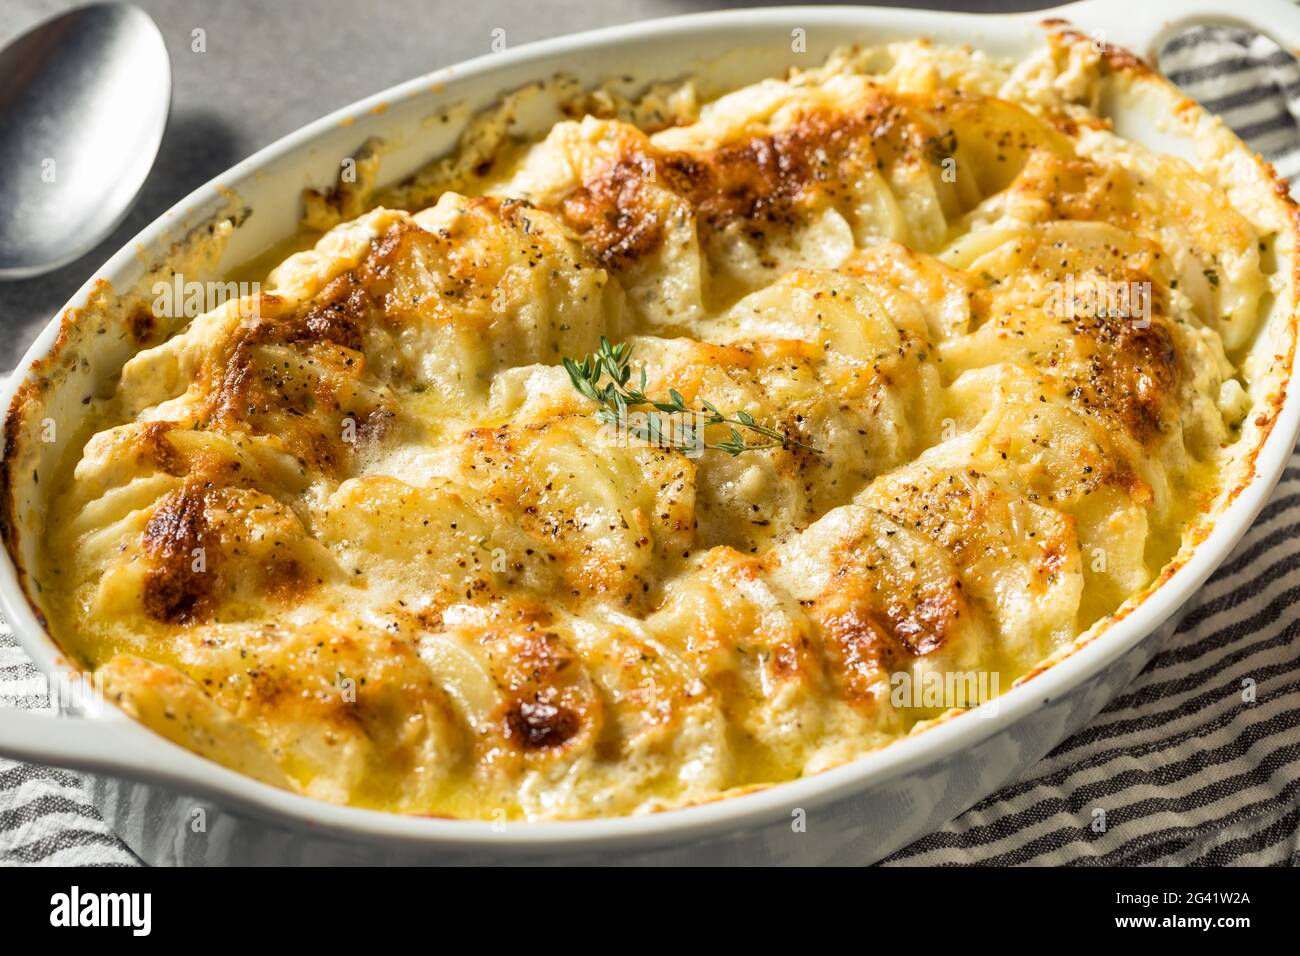 Homemade Creamy Scalloped Potatoes with Cheese and Spices Stock Photo